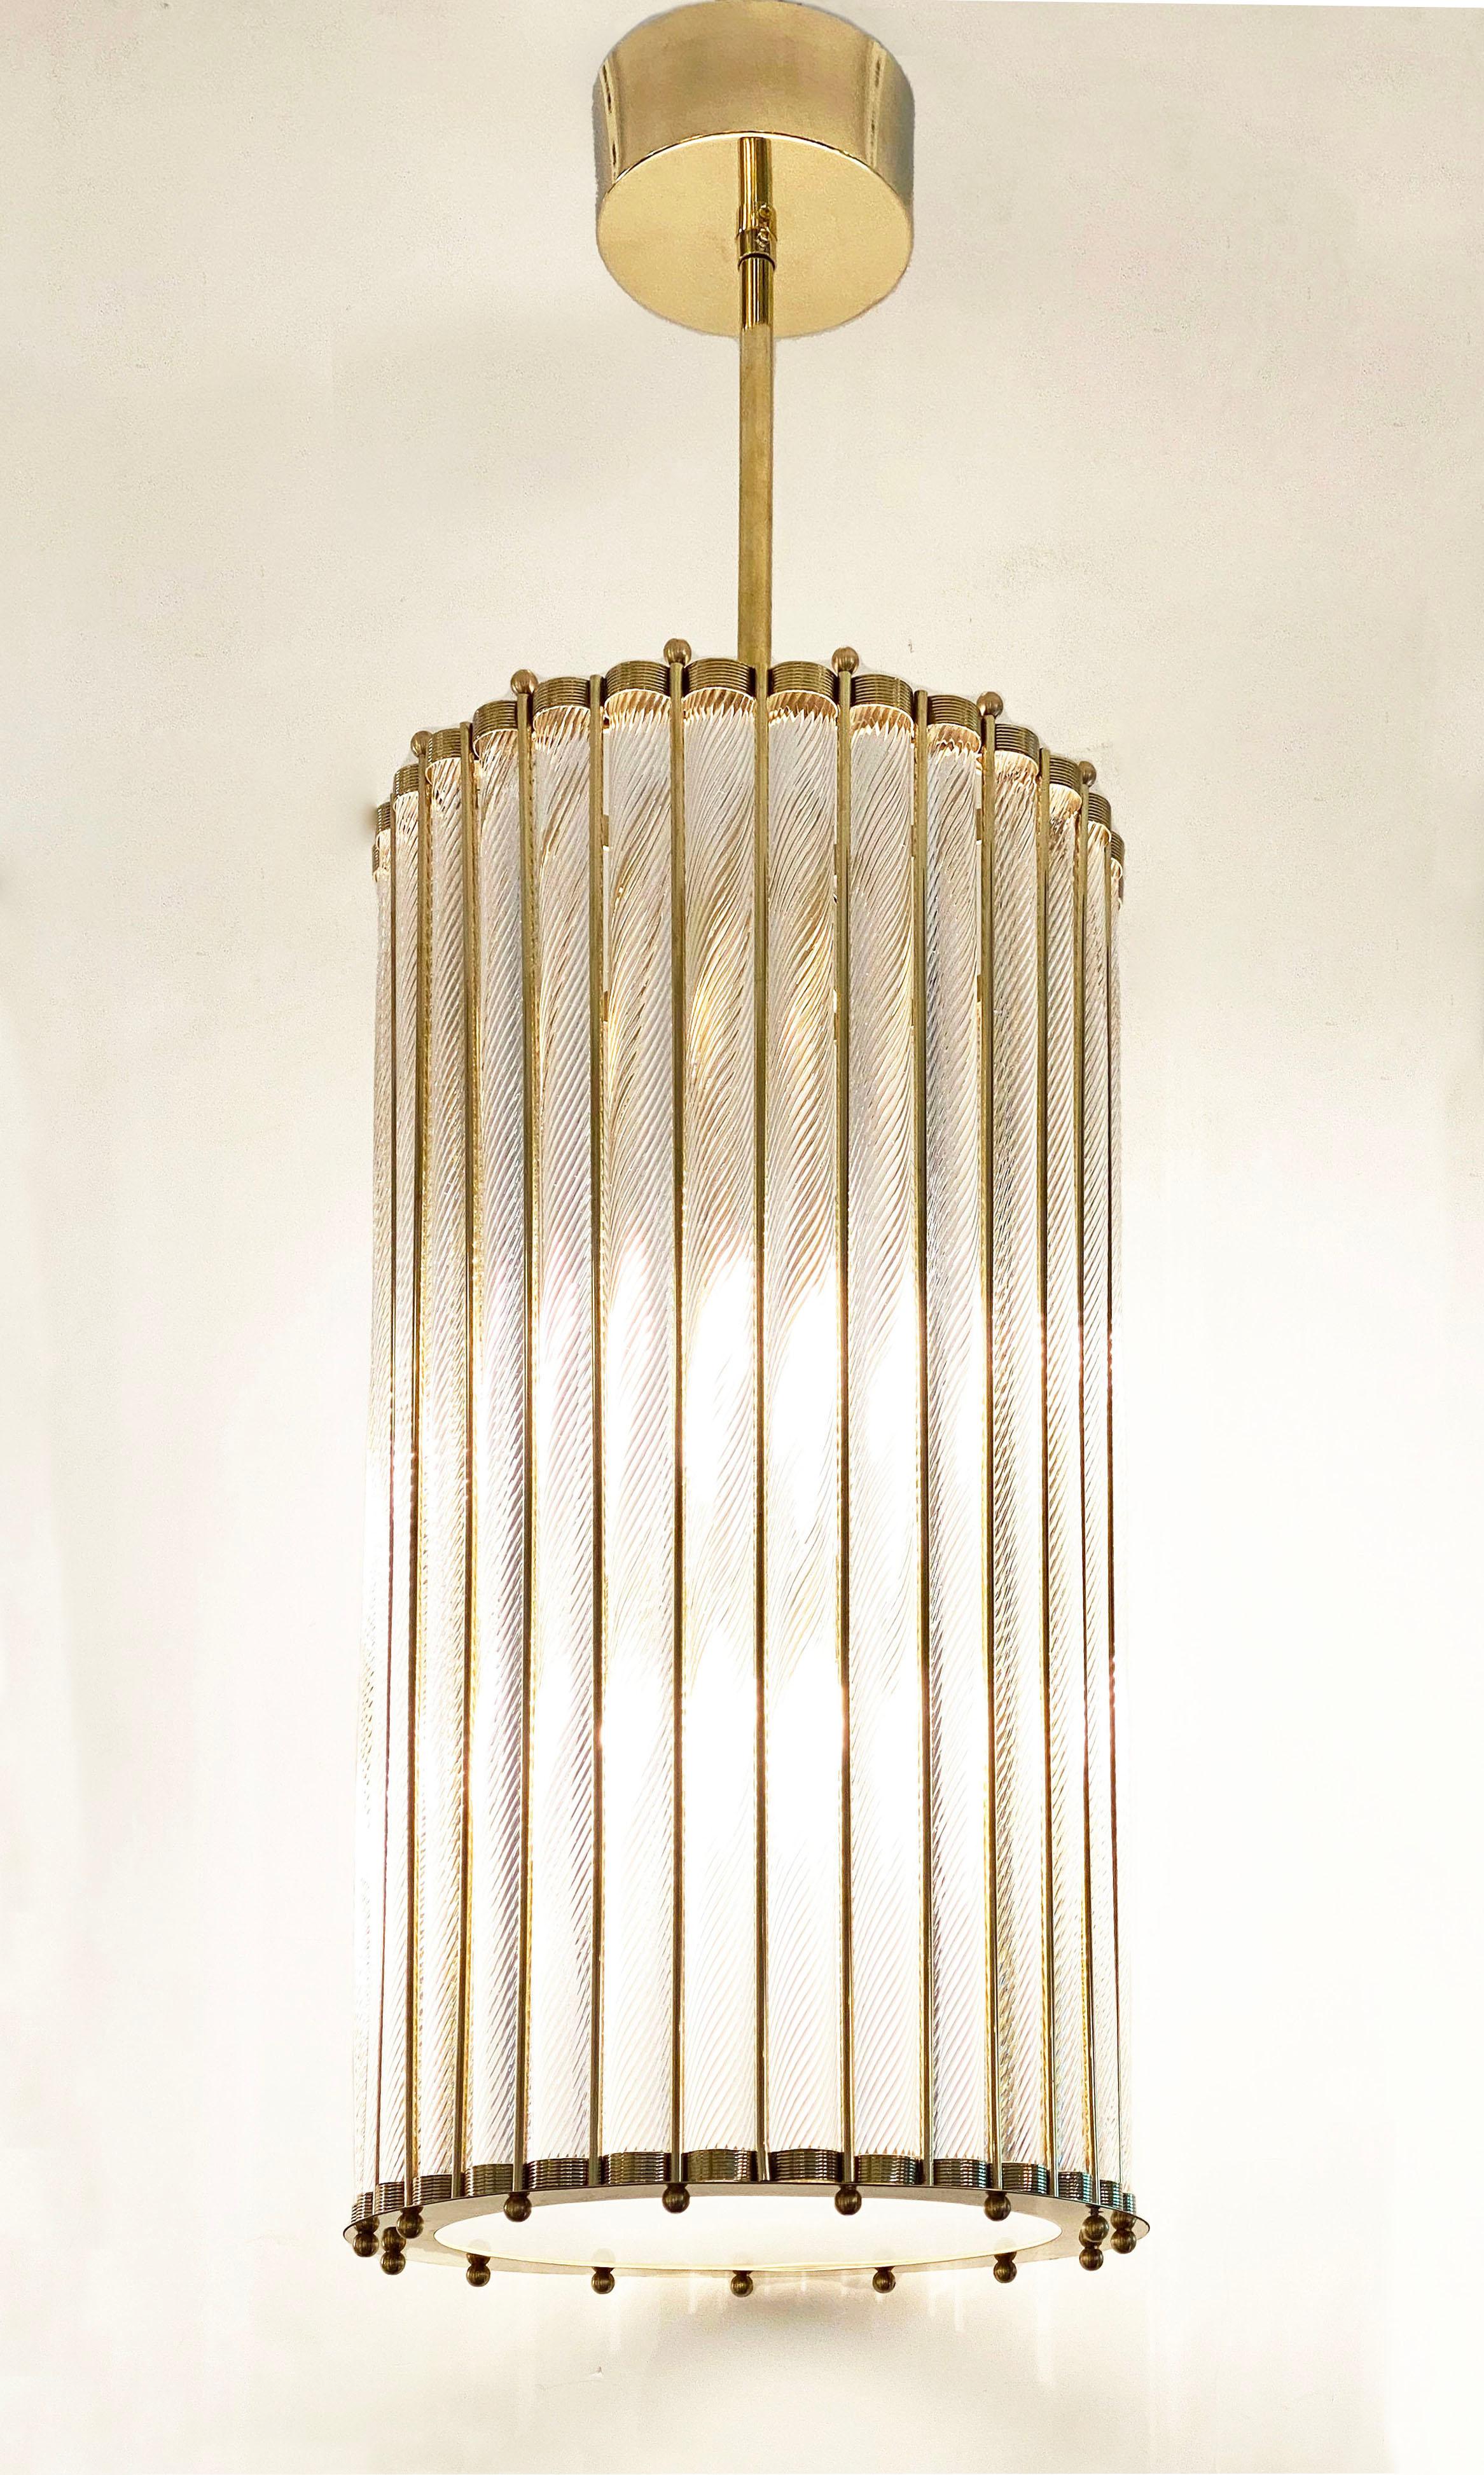 This design has been chosen for the restaurant in Dallas Sadelle's of Major Food Group. Monumental contemporary Italian Art Deco Design round lantern / chandelier, entirely hand crafted, customizable in height, diameter and finishes, the nicely